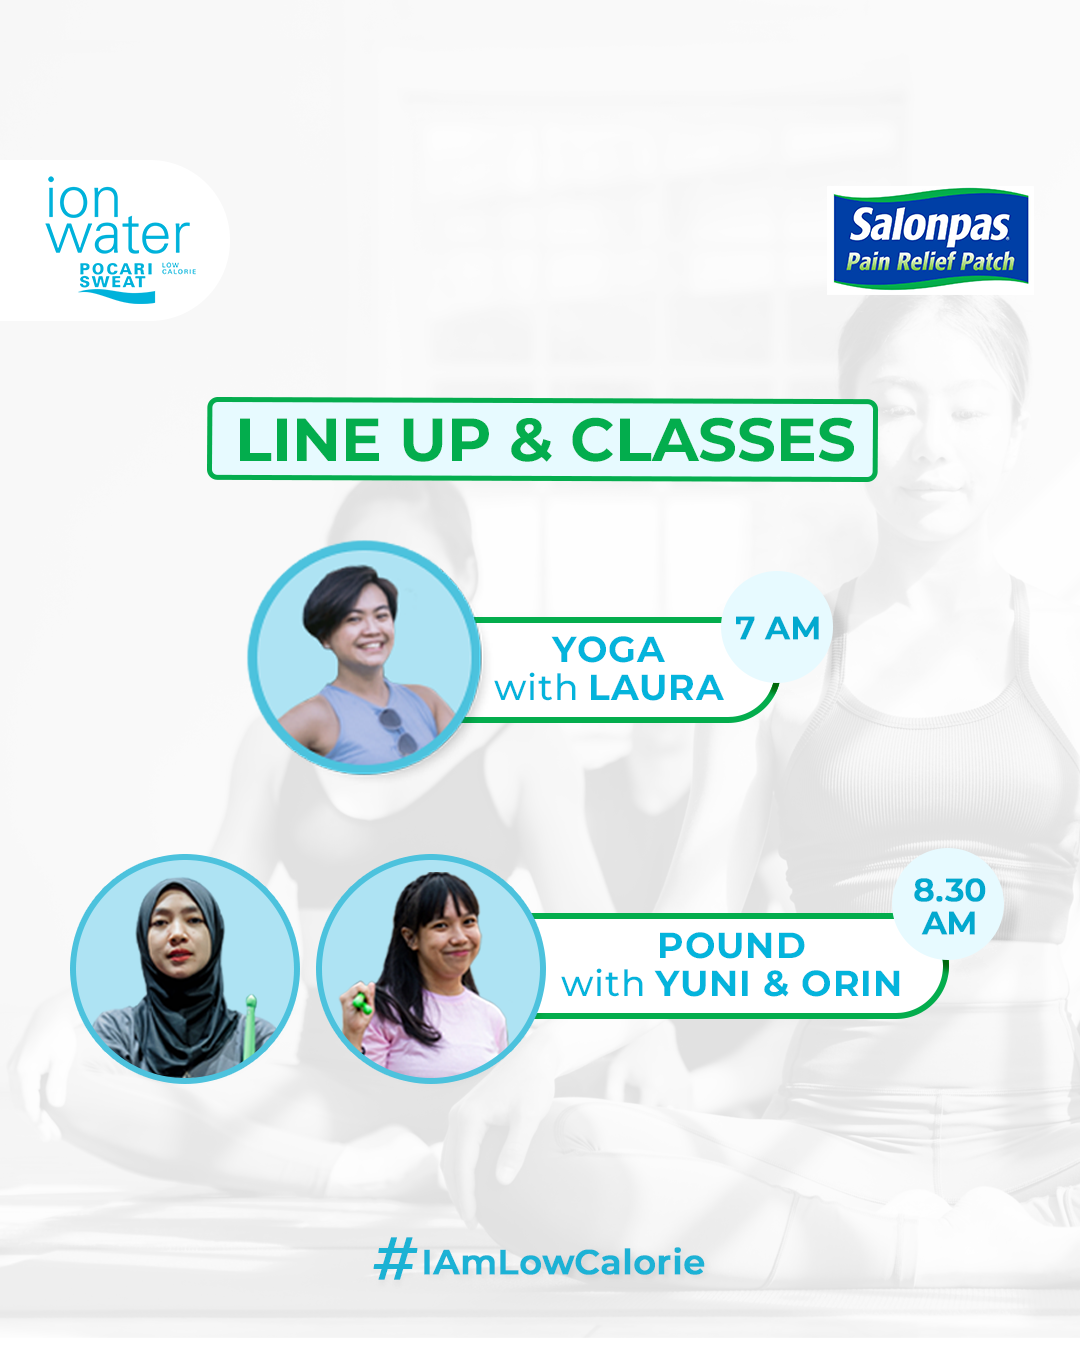 ION WATER Kartini's Day Special Class with Salonpas Pain Relief Patch - POUND